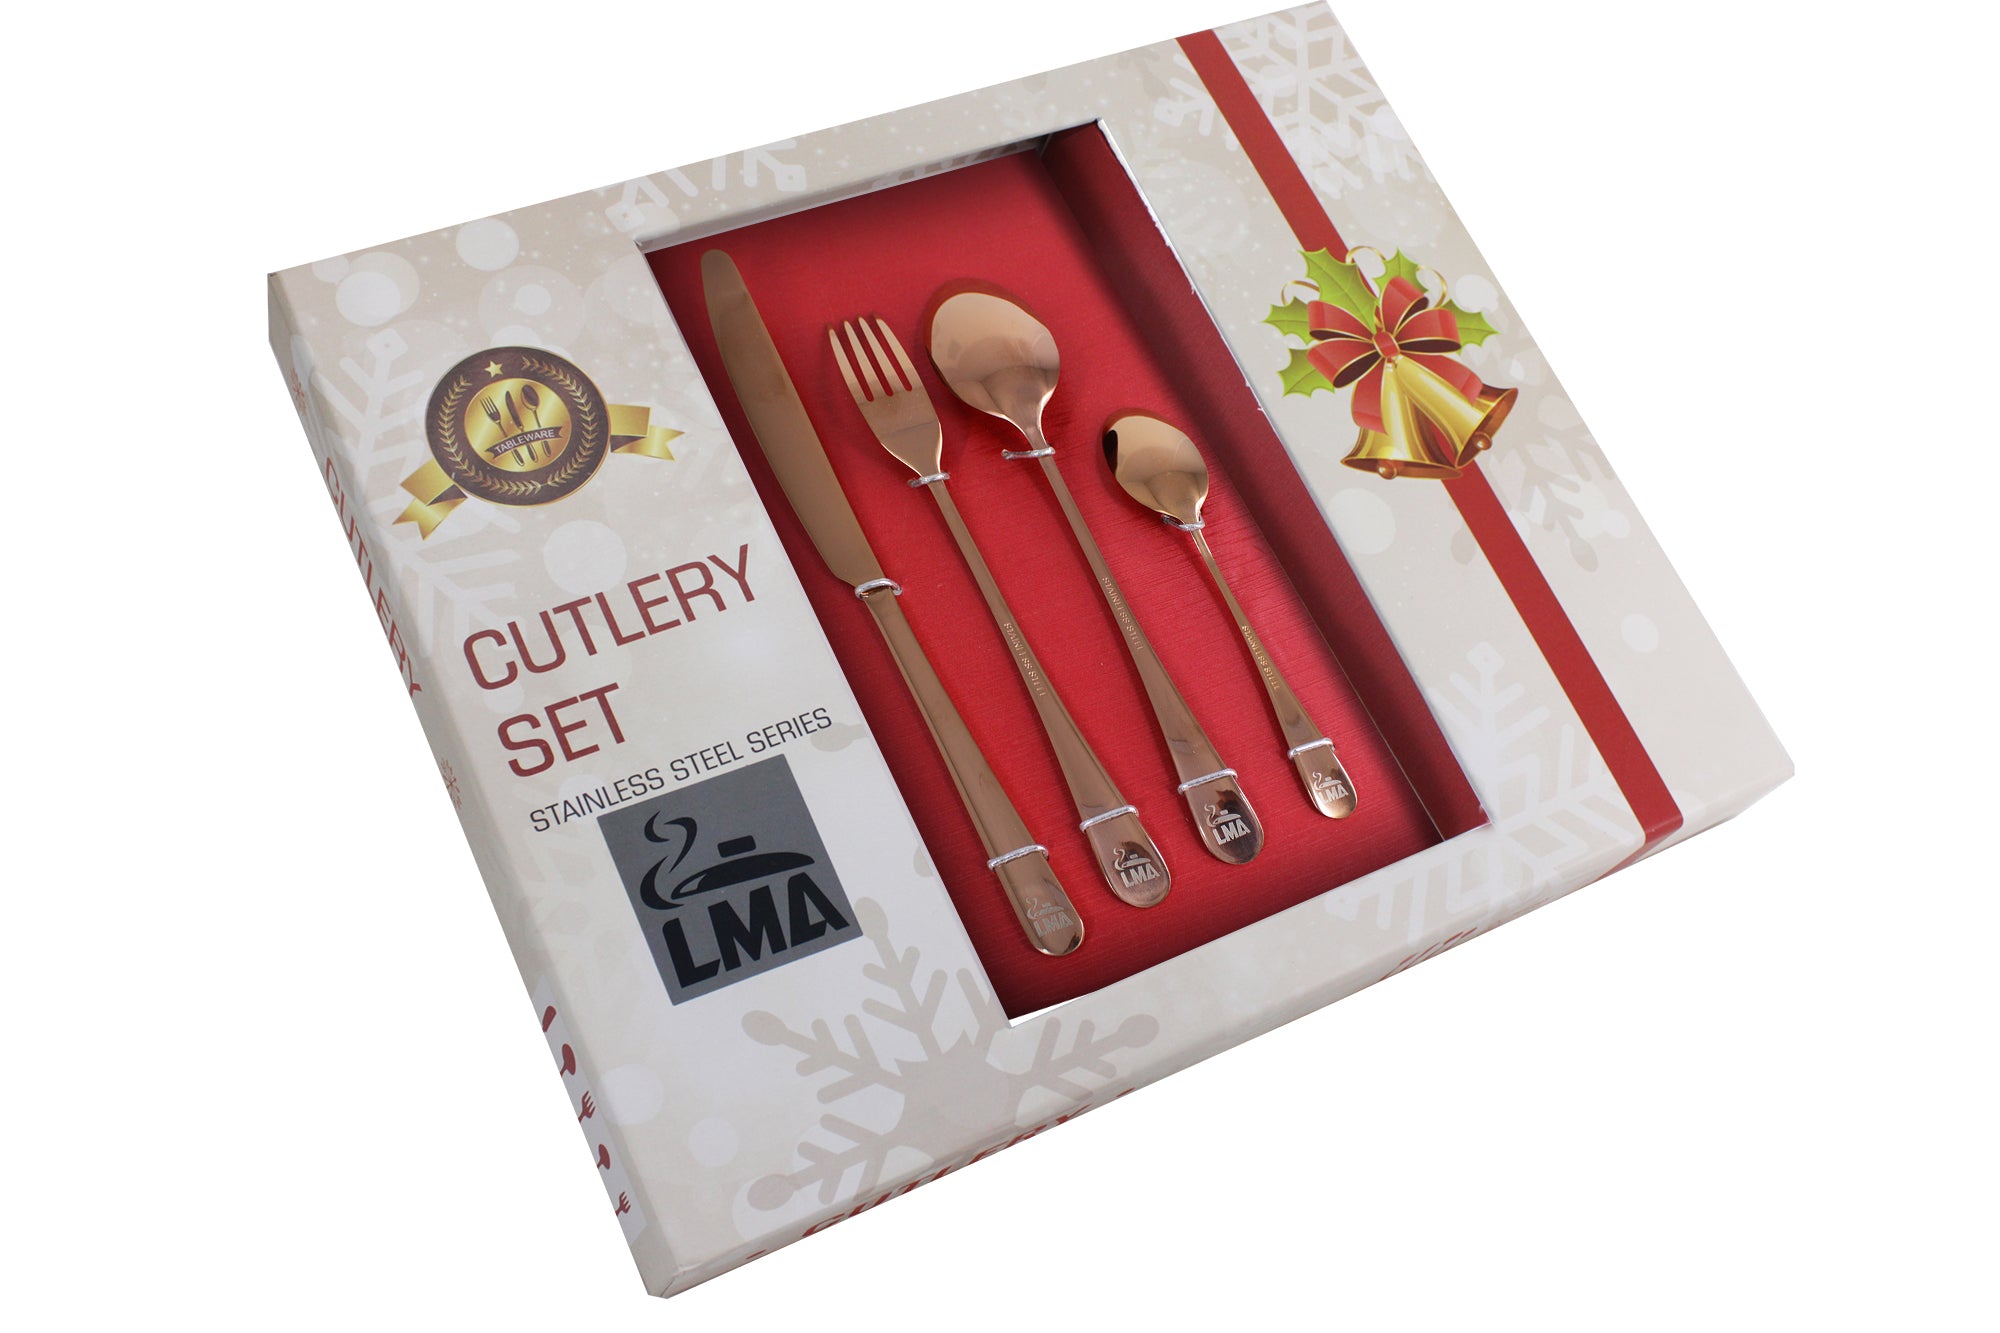 LMA 24 Piece Stainless Steel Cutlery Set in Christmas Gift Box